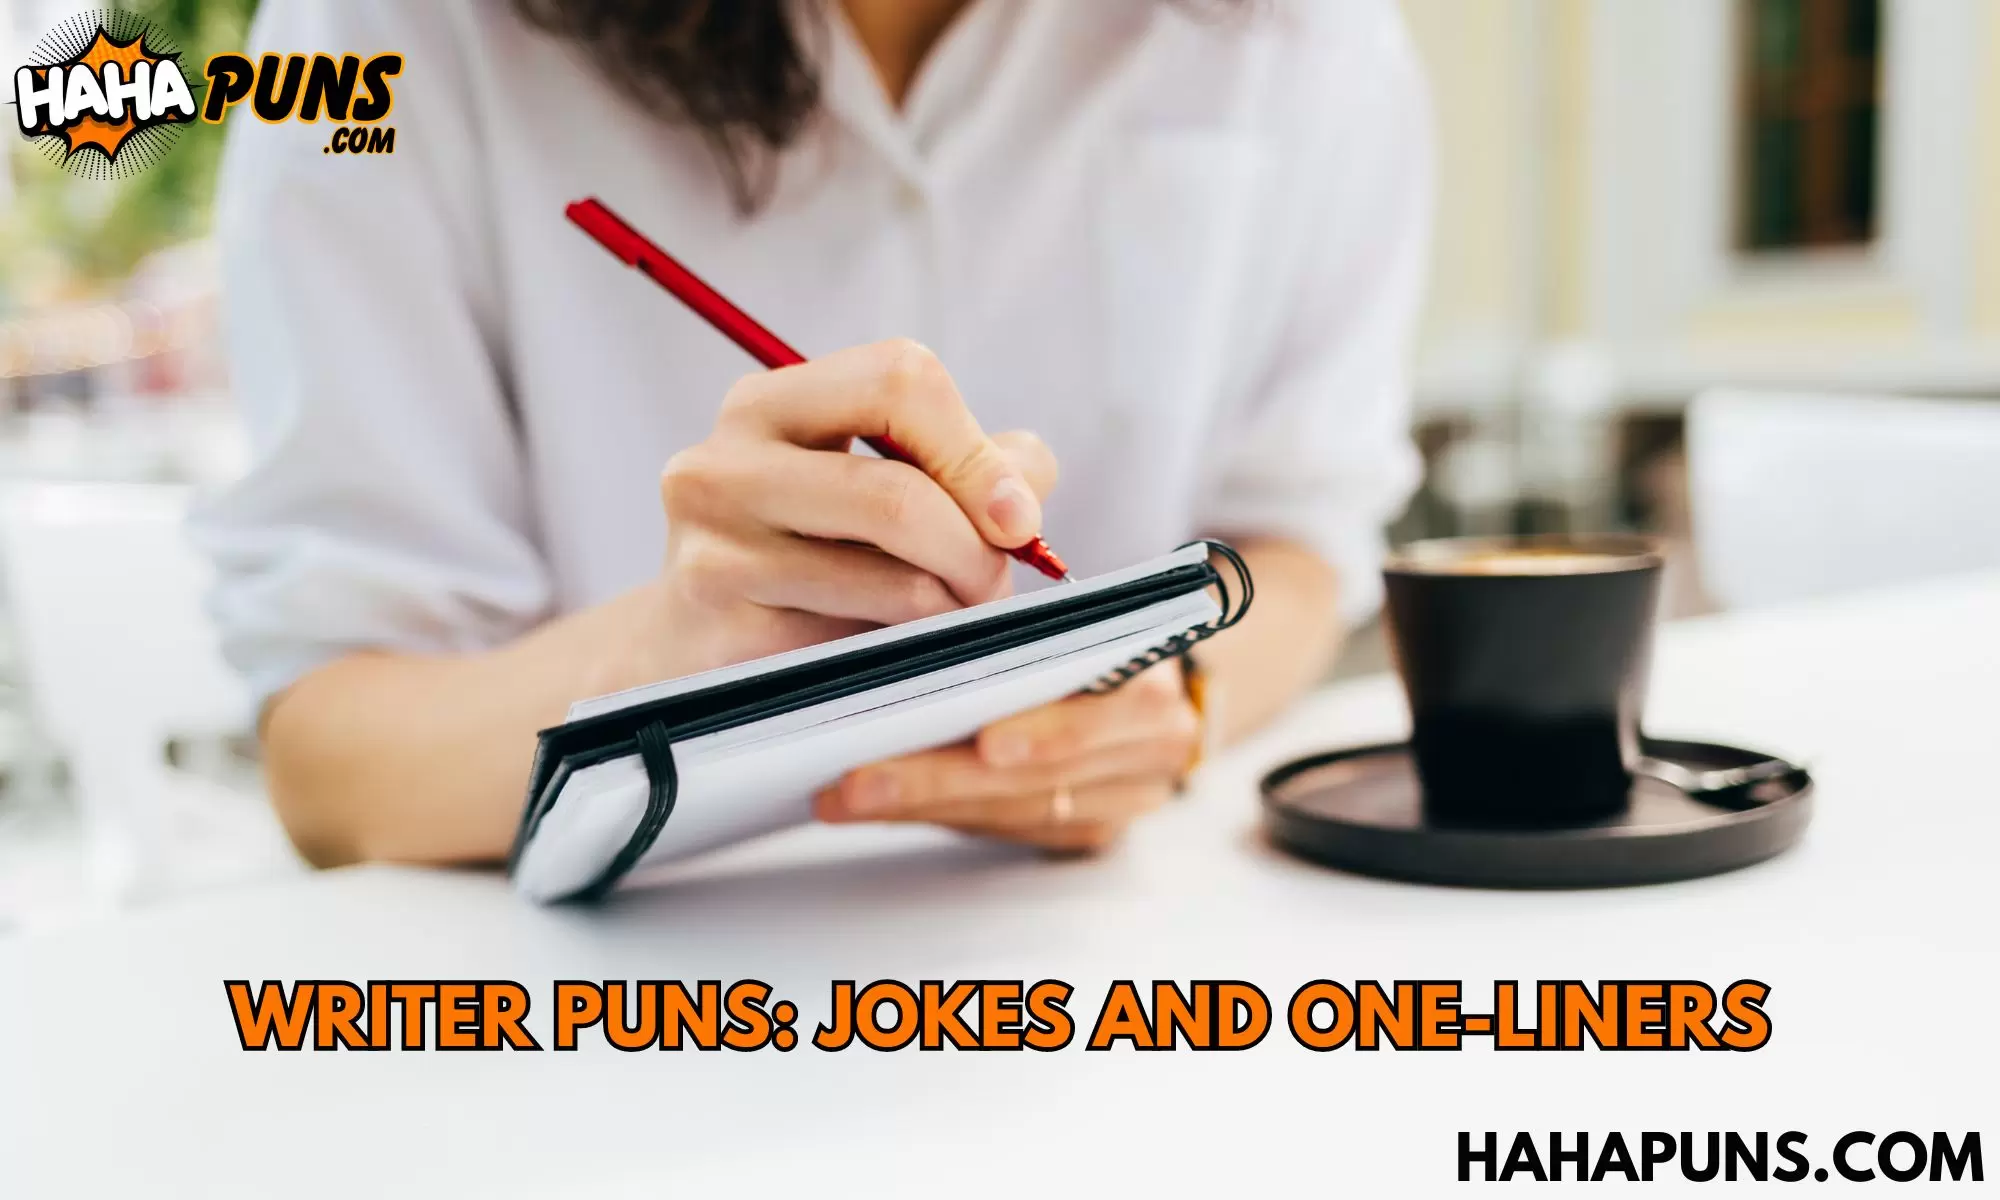 Writer Puns: Jokes And One-Liners